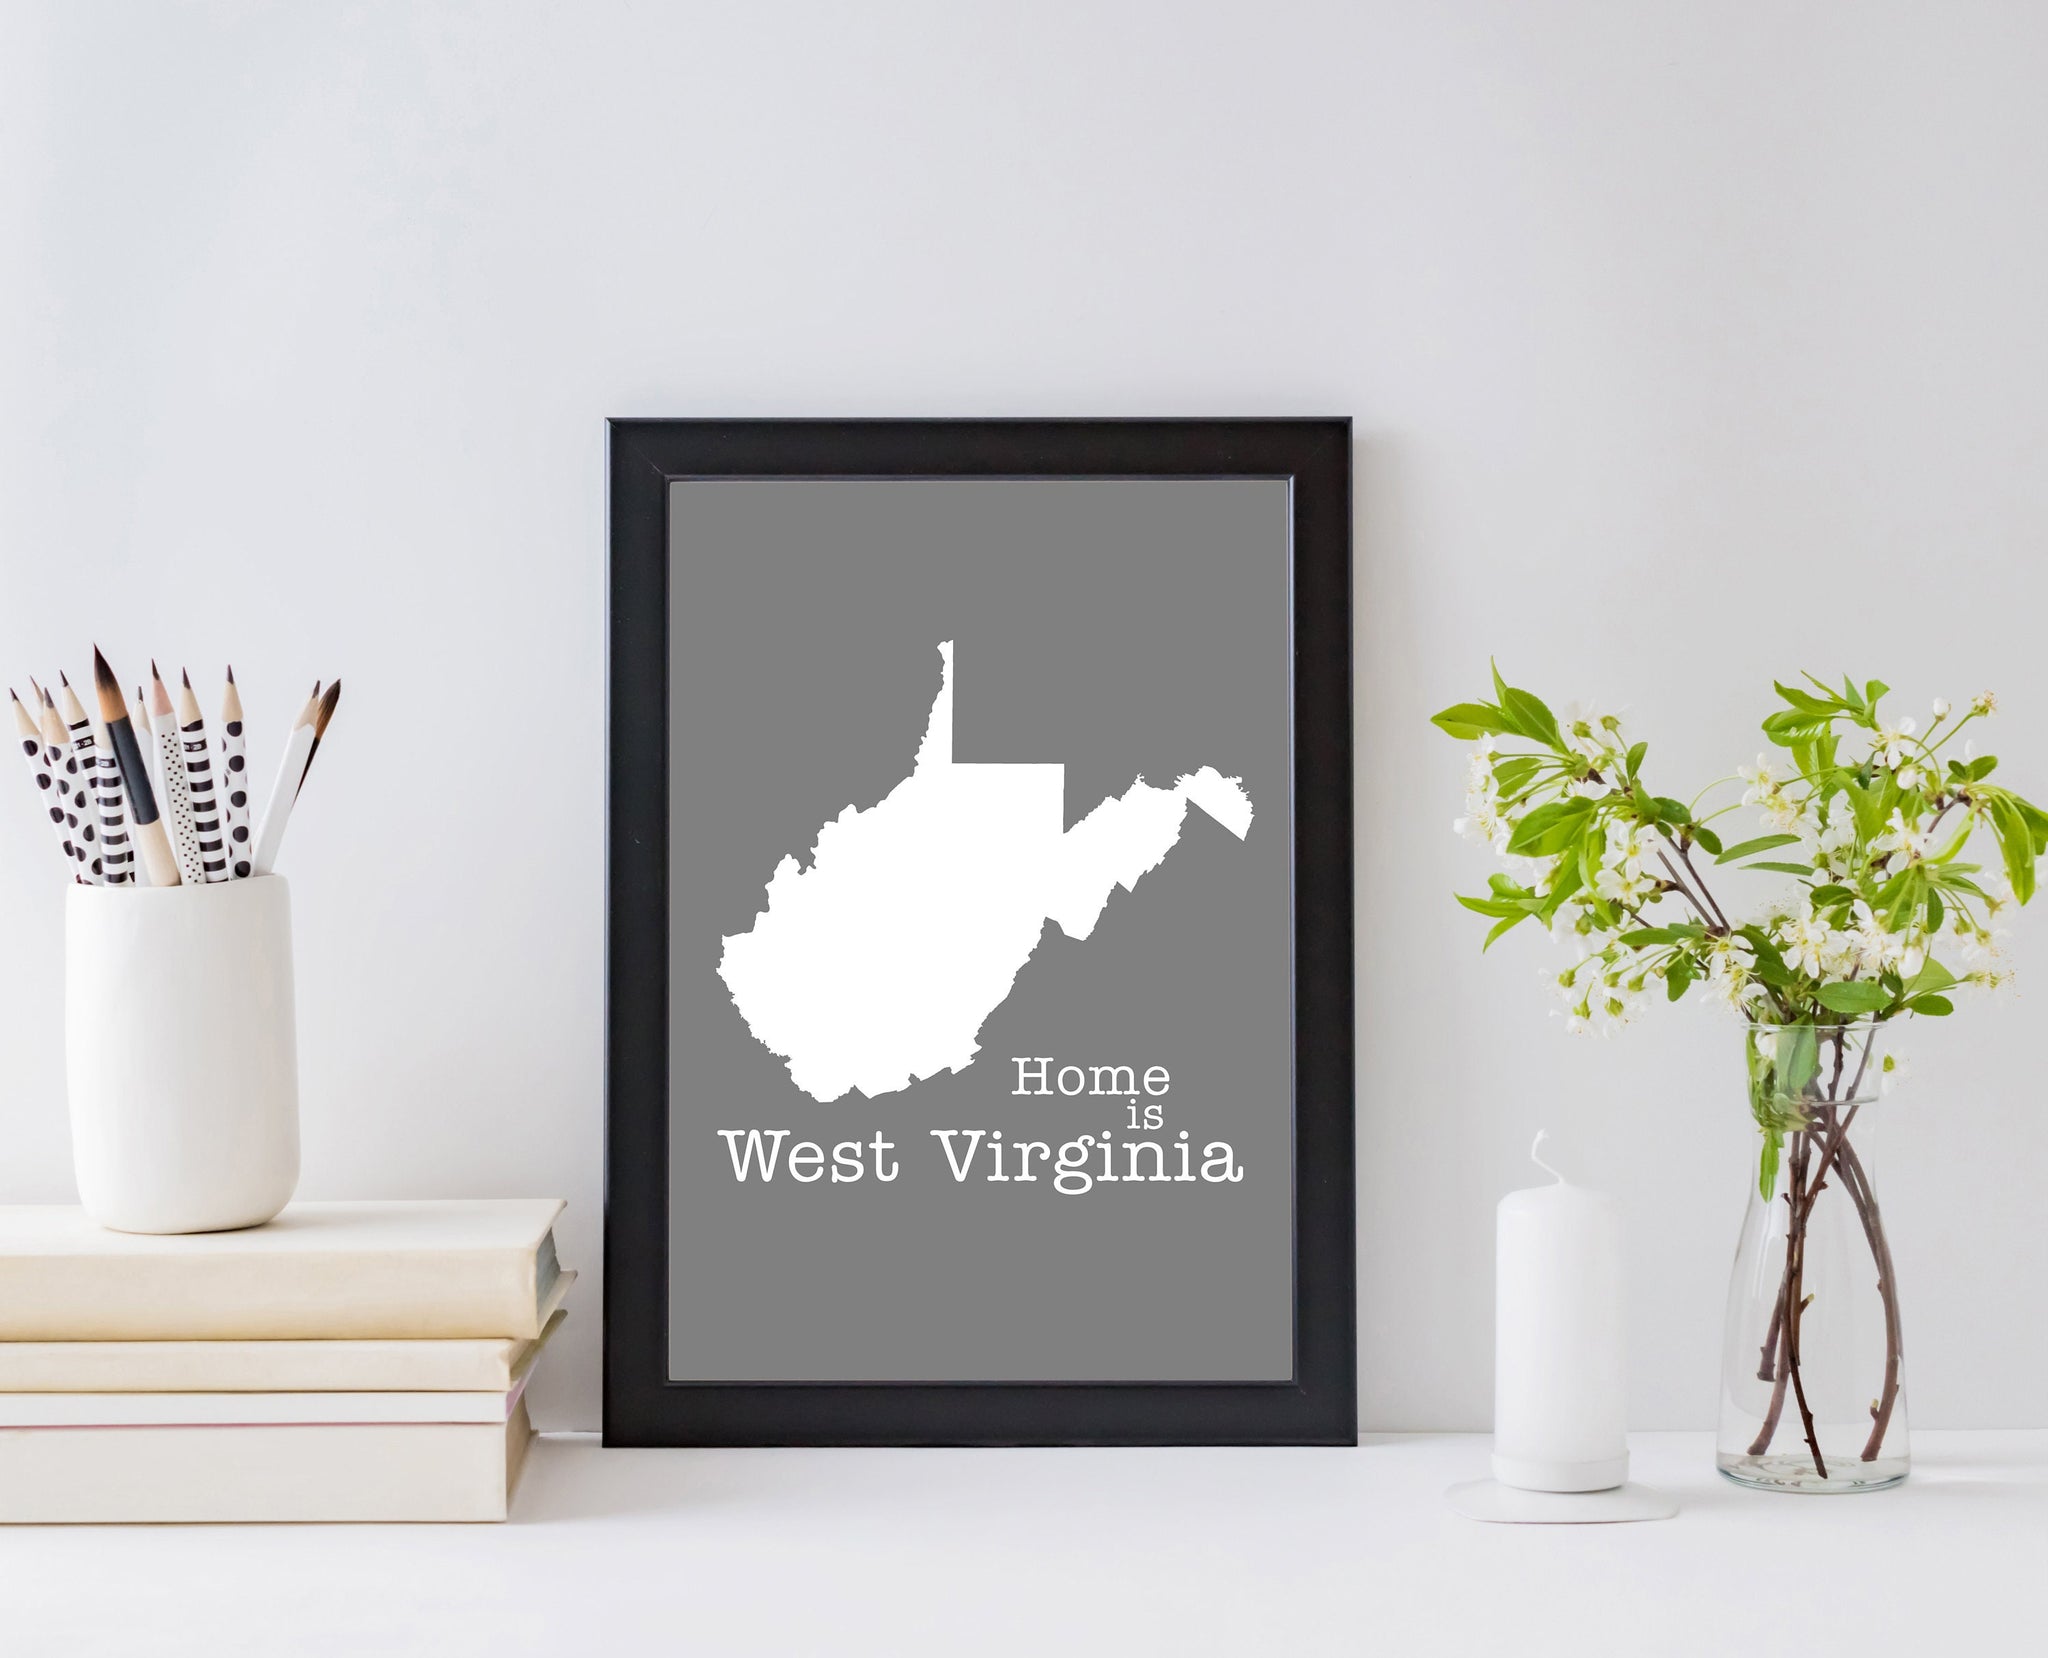 West Virginia Map Wall Art, West Virginia Modern Map Poster Print, City map wall decor, West Virginia State Poster, Family room art, Posters